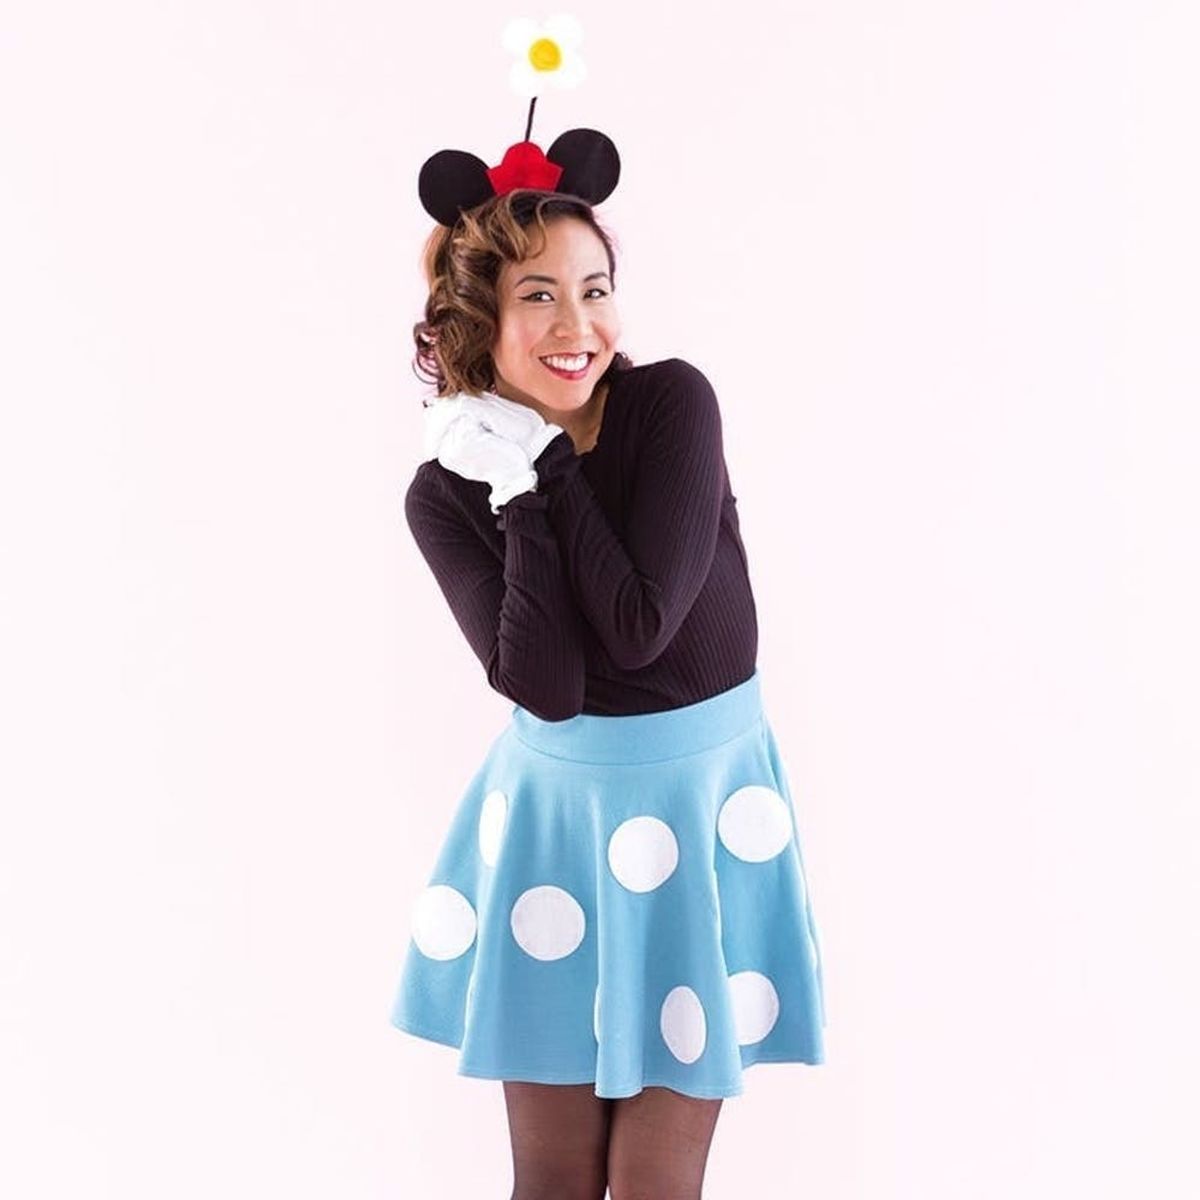 20 Creative Ways to Rock a Minnie Mouse Costume This Halloween